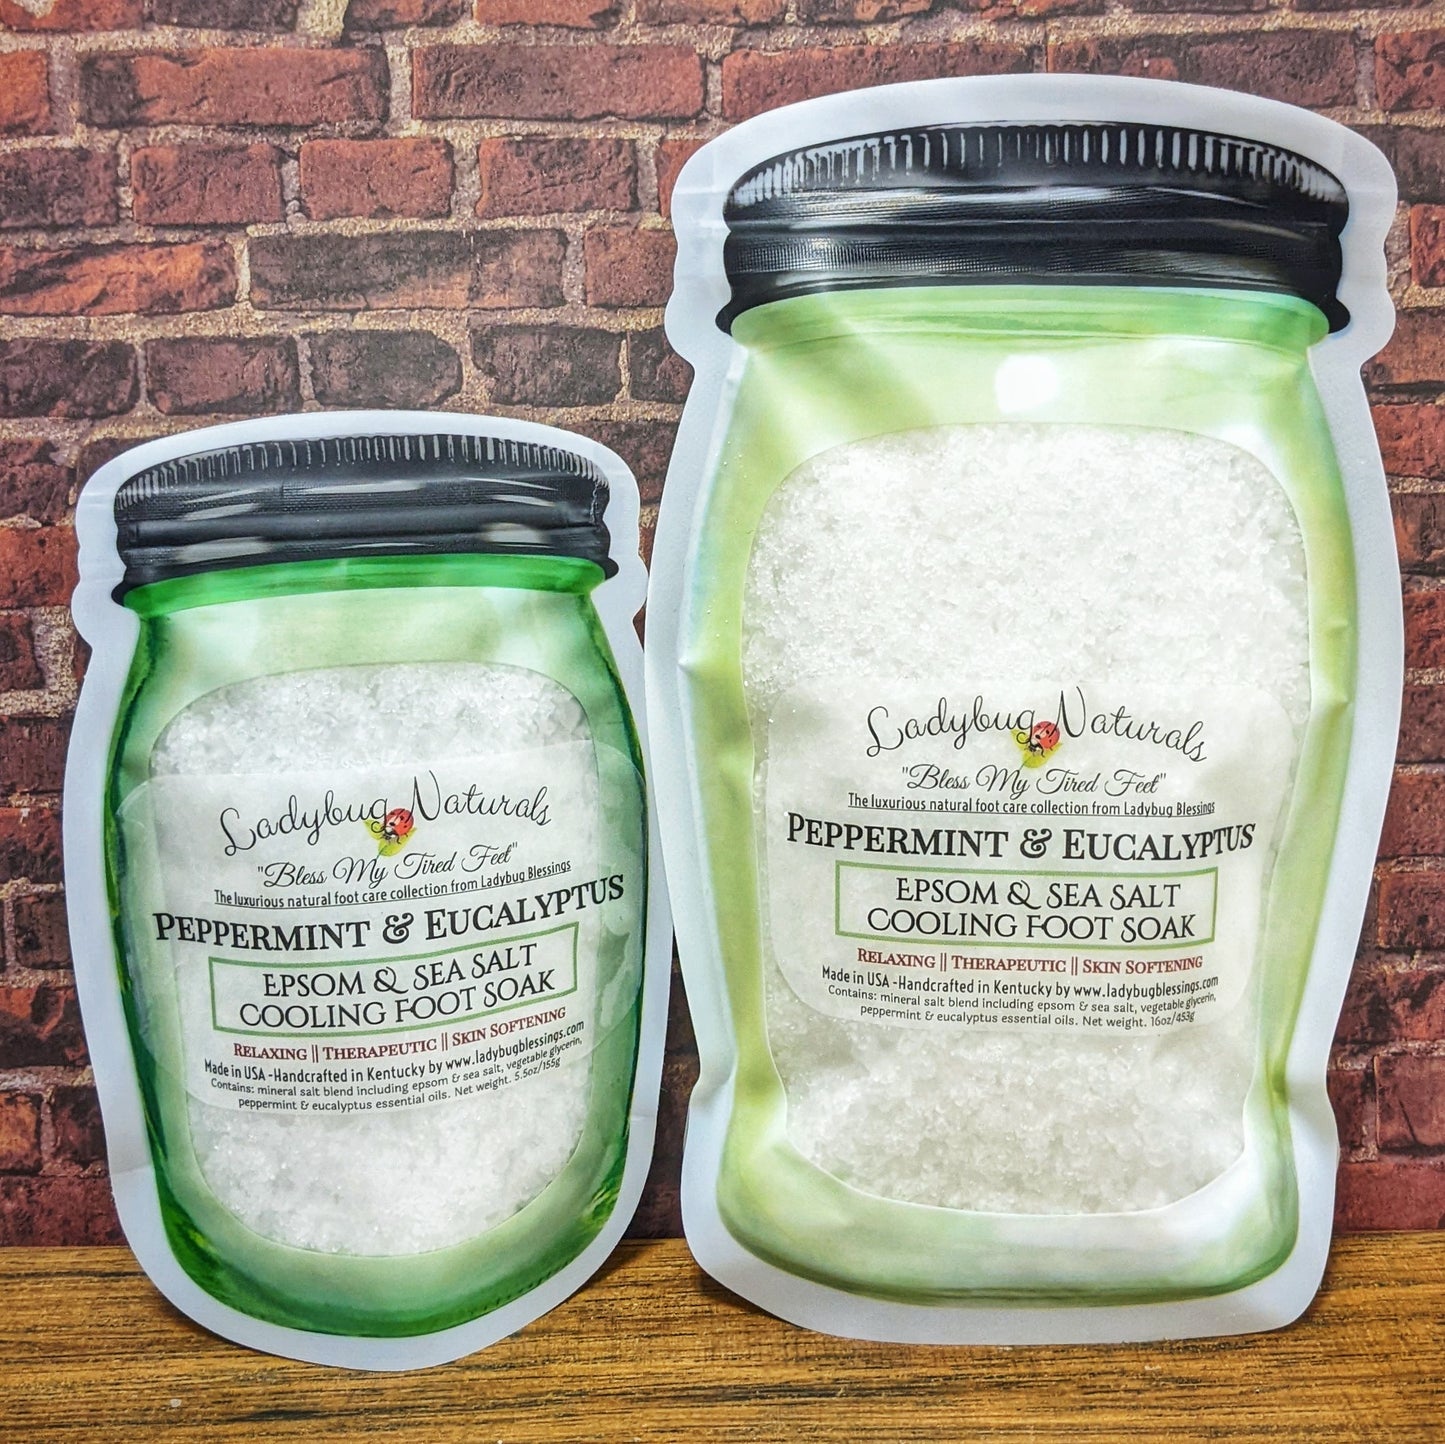 Cooling Foot Soak with Peppermint & Eucalyptus - Two Sizes!